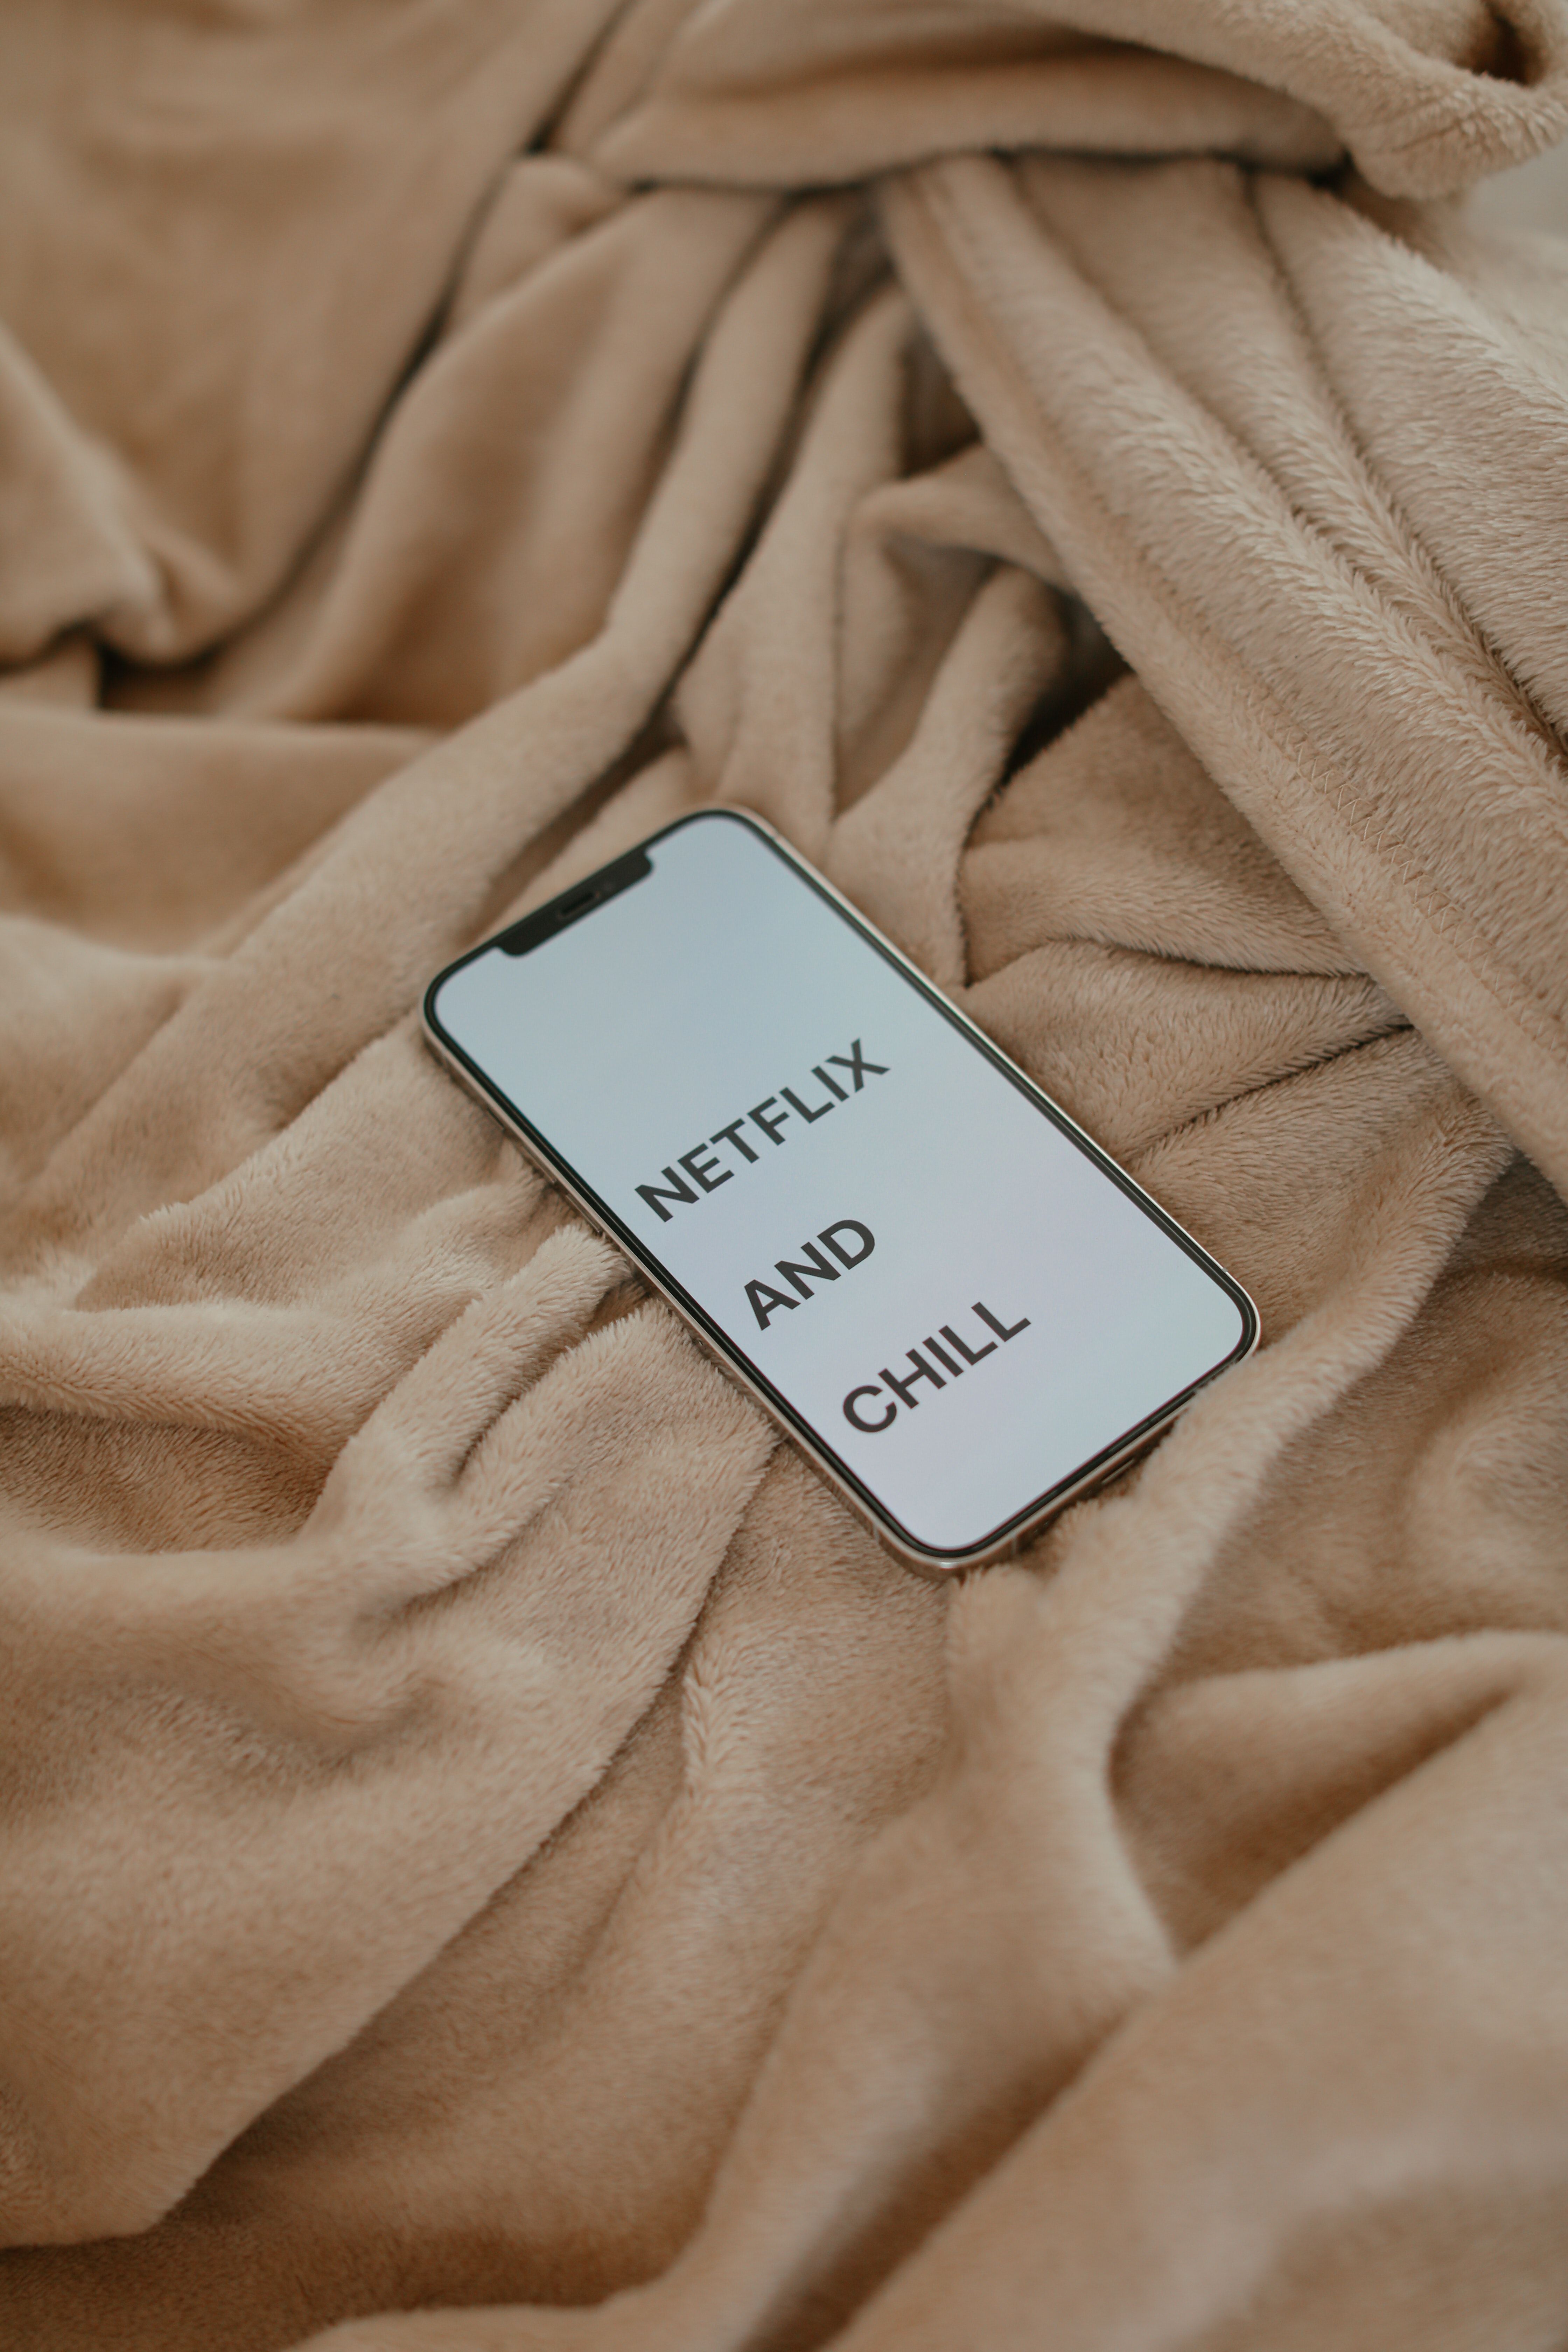 Netflix And Chill Photo, Download The BEST Free Netflix And Chill & HD Image